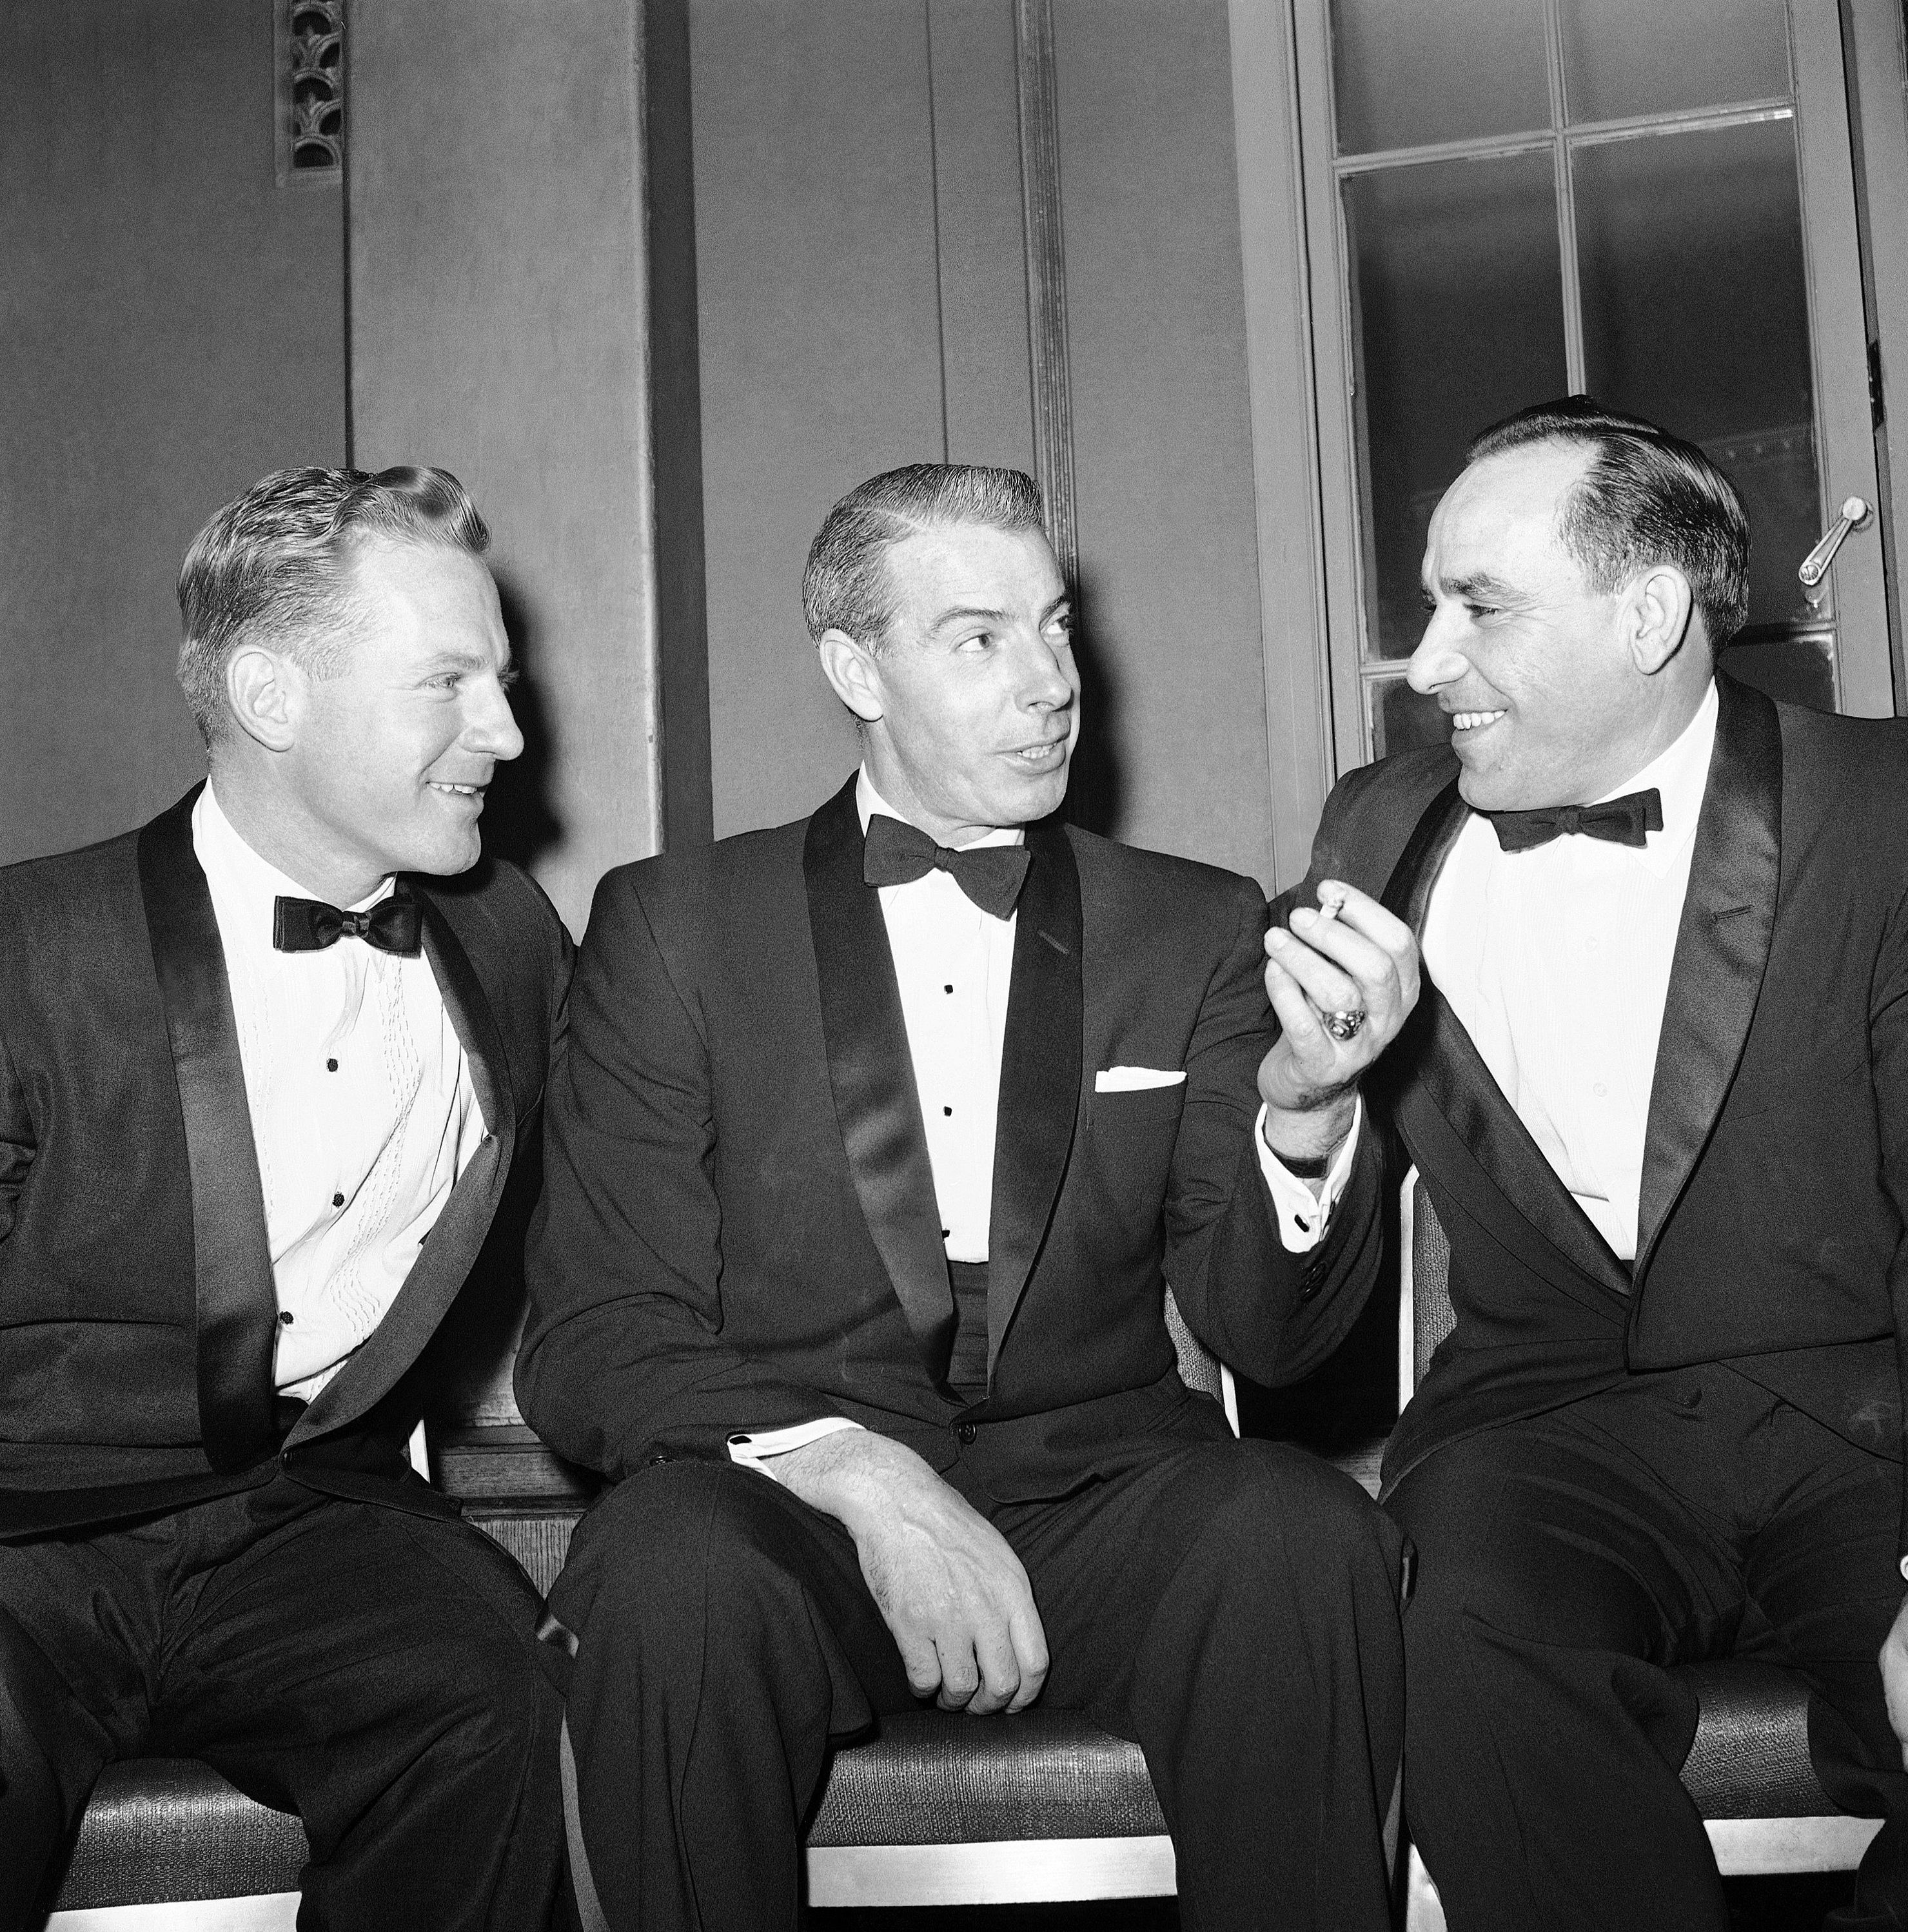 Joe Dimaggio With Mickey Mantle And Billy Martin Vintage by Photo File